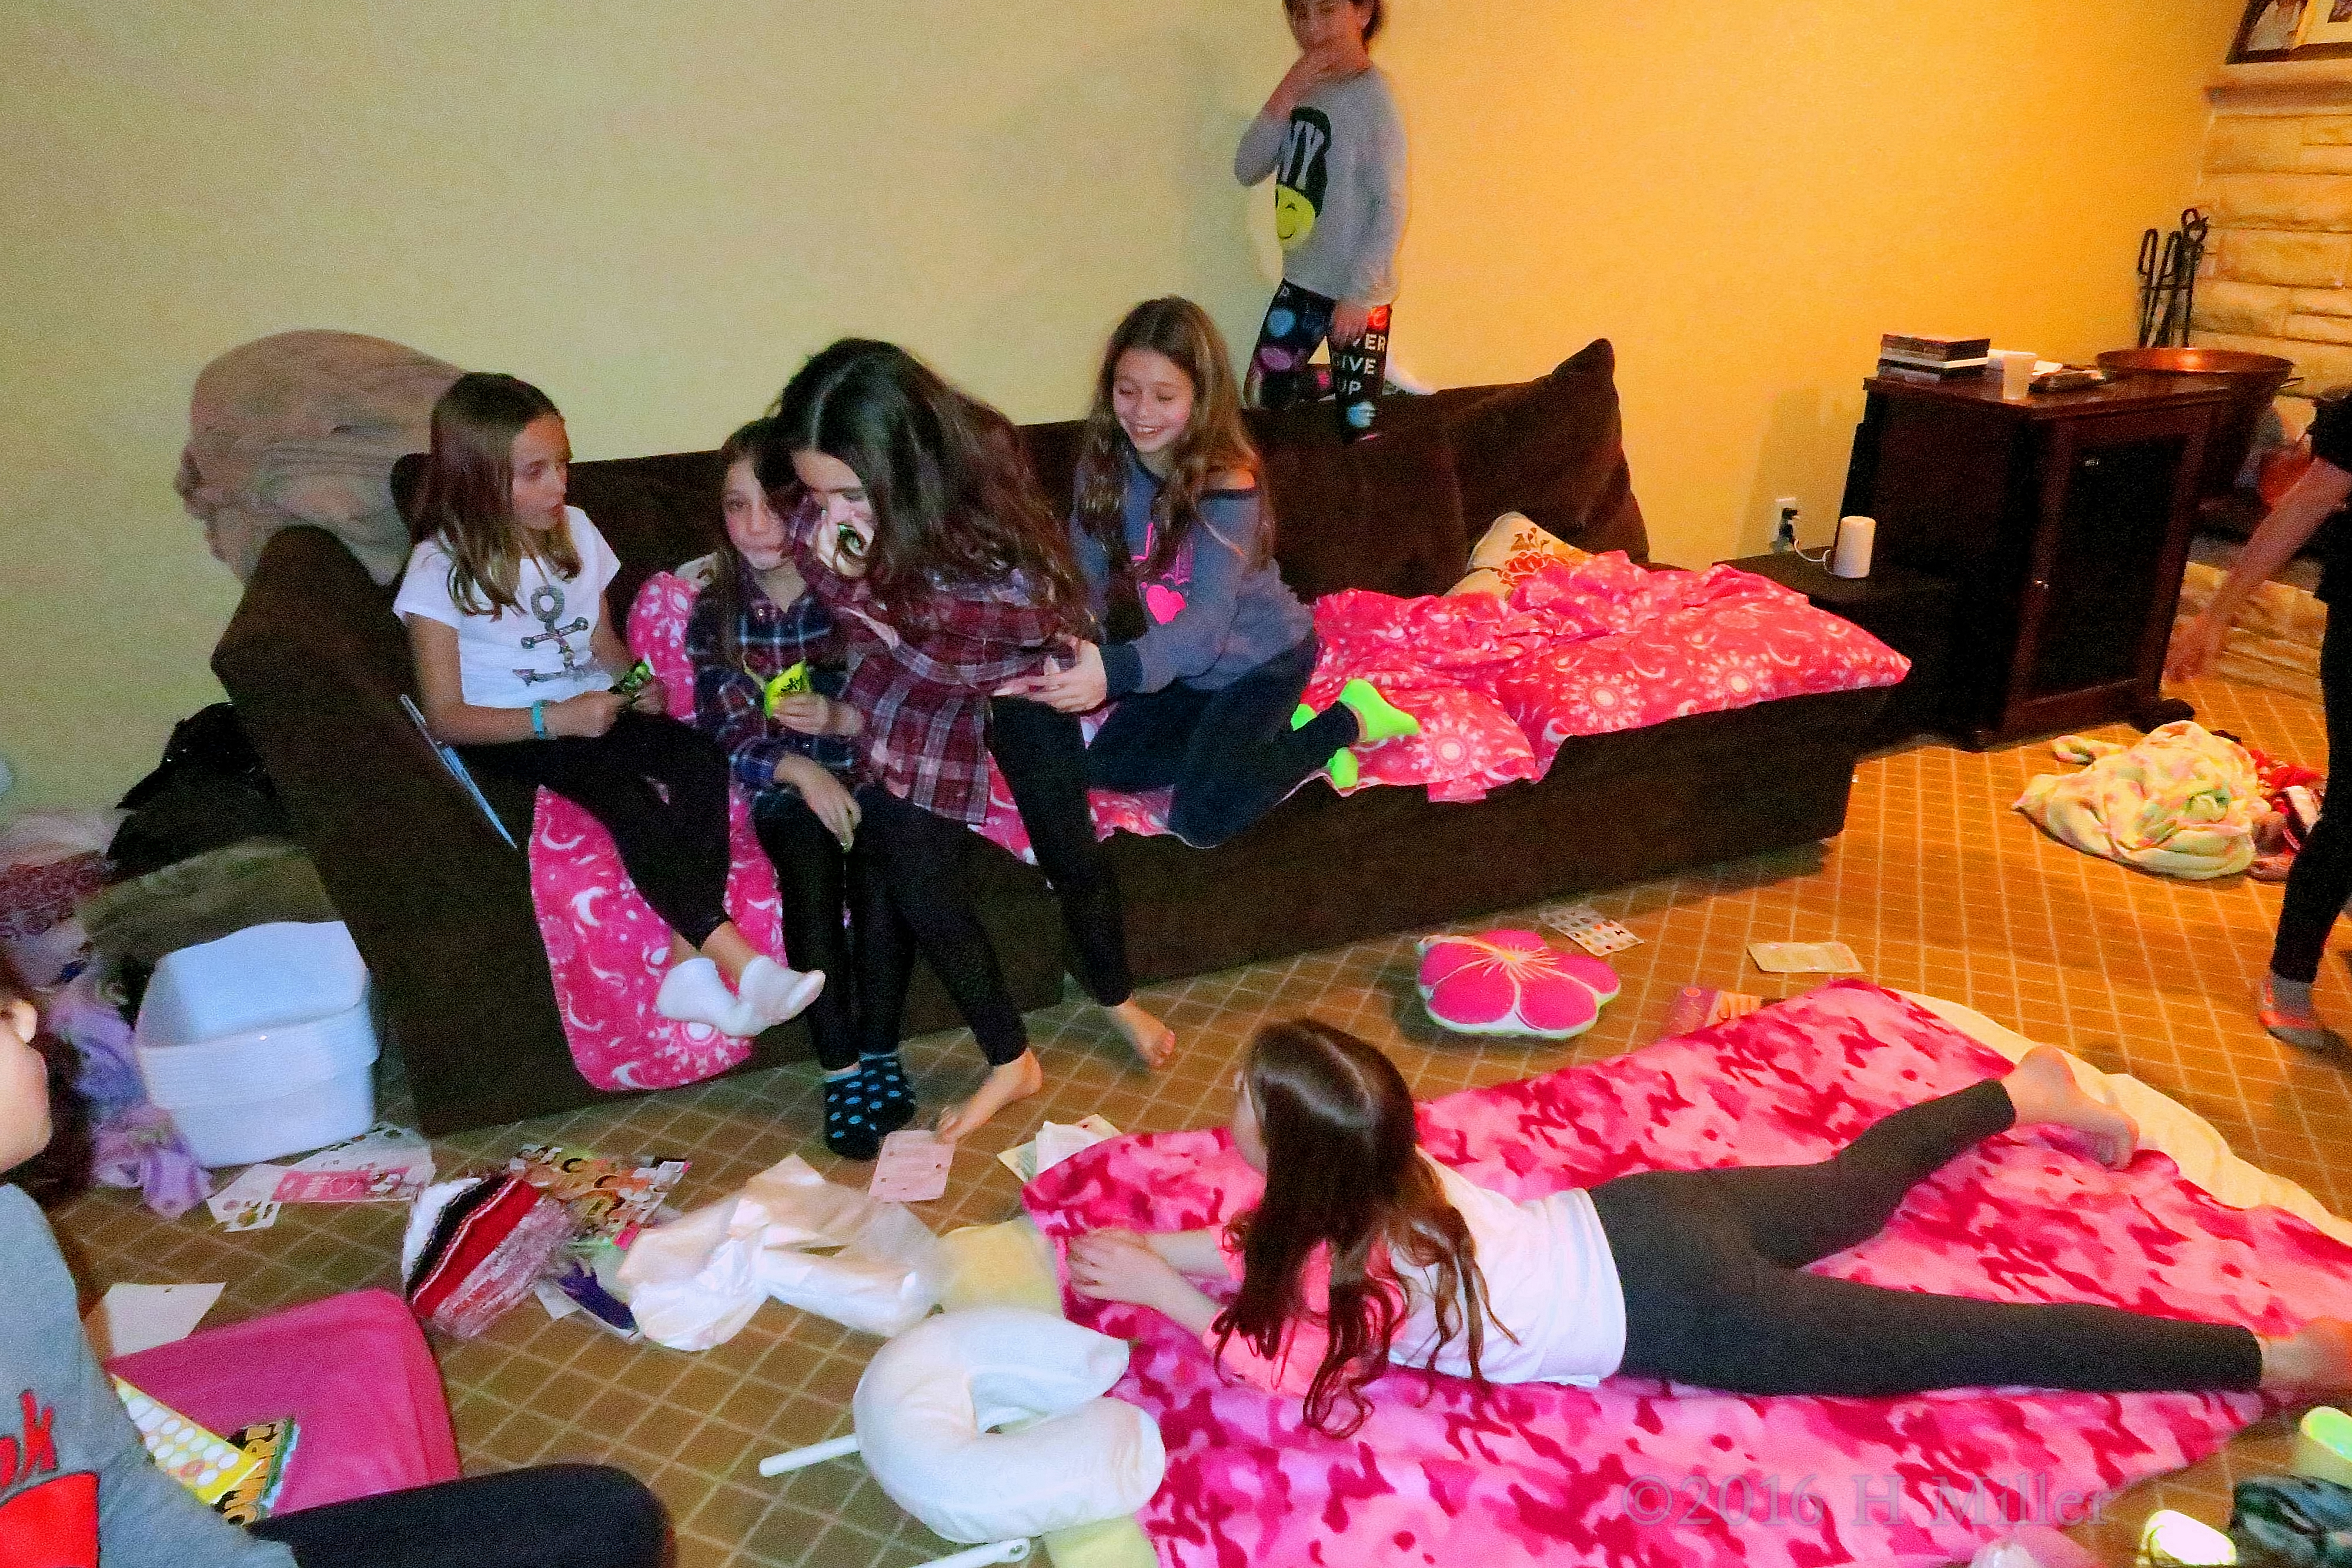 The Girls Hanging Out At The Home Spa Party.